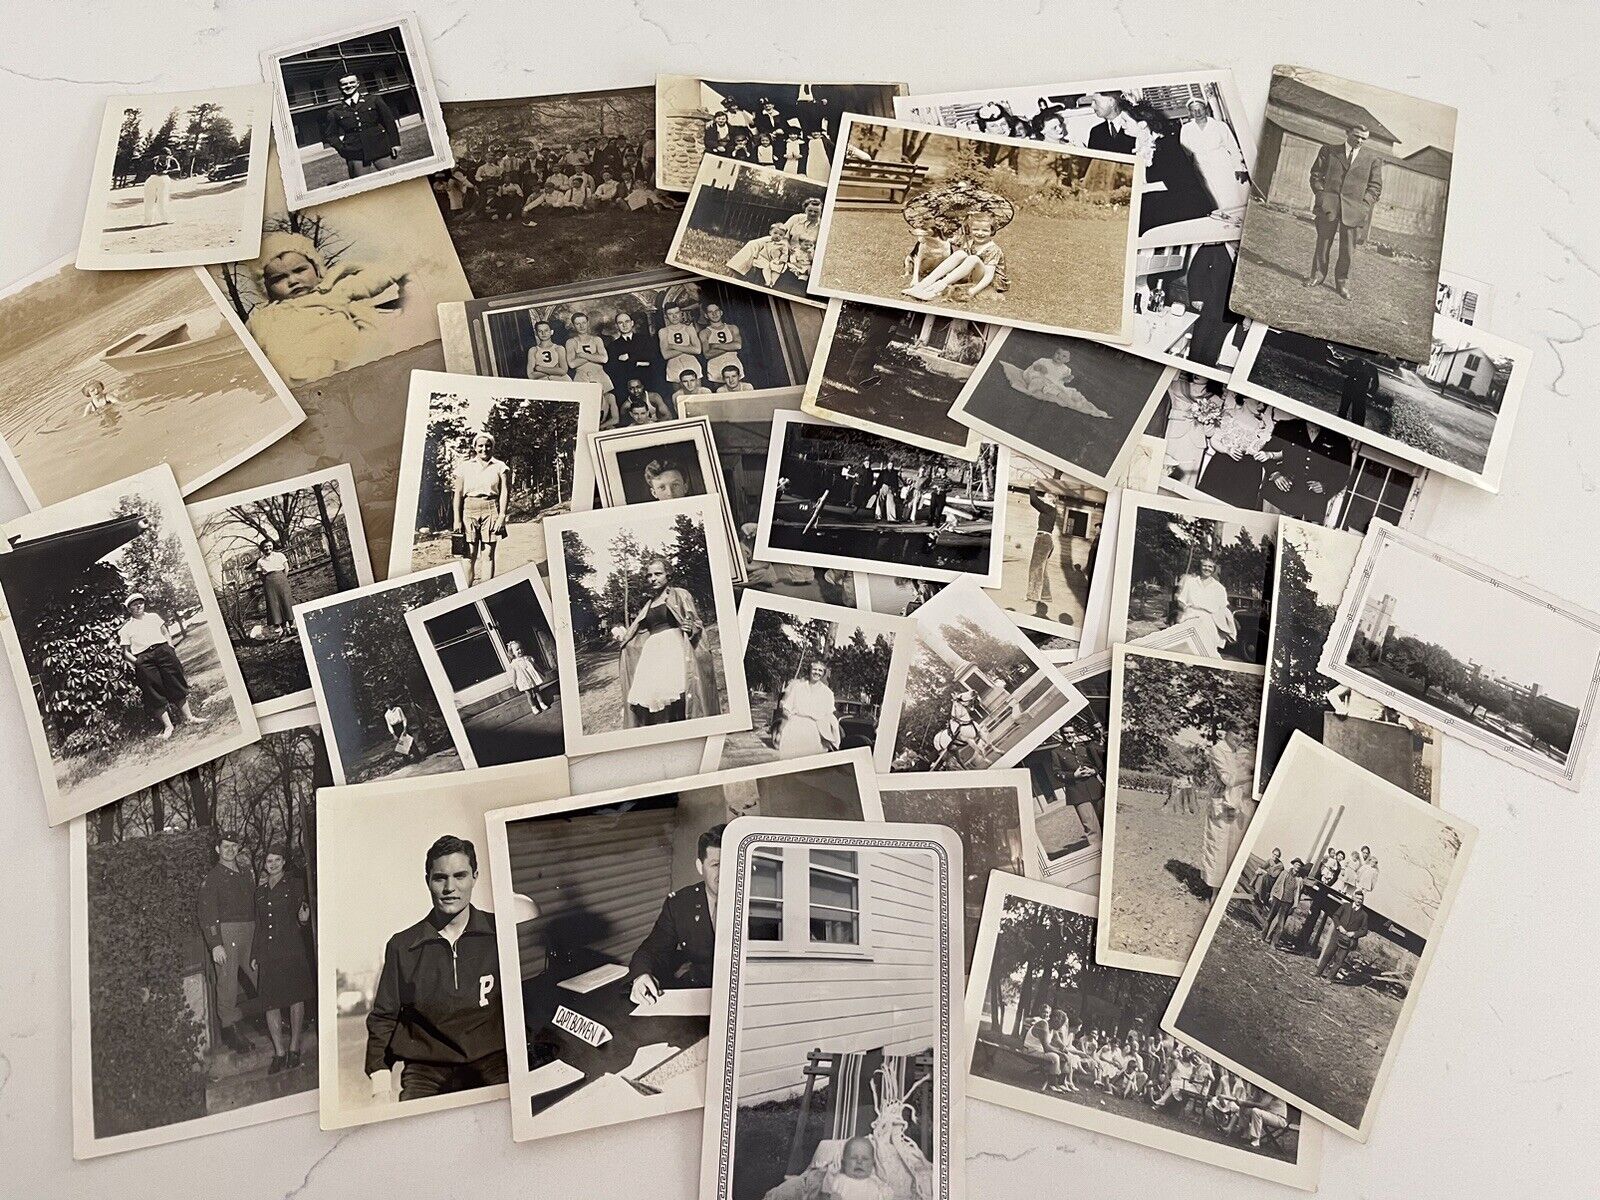 Lot of 70 Random Old Photographs Mostly B&W Vintage Snapshots Pictures